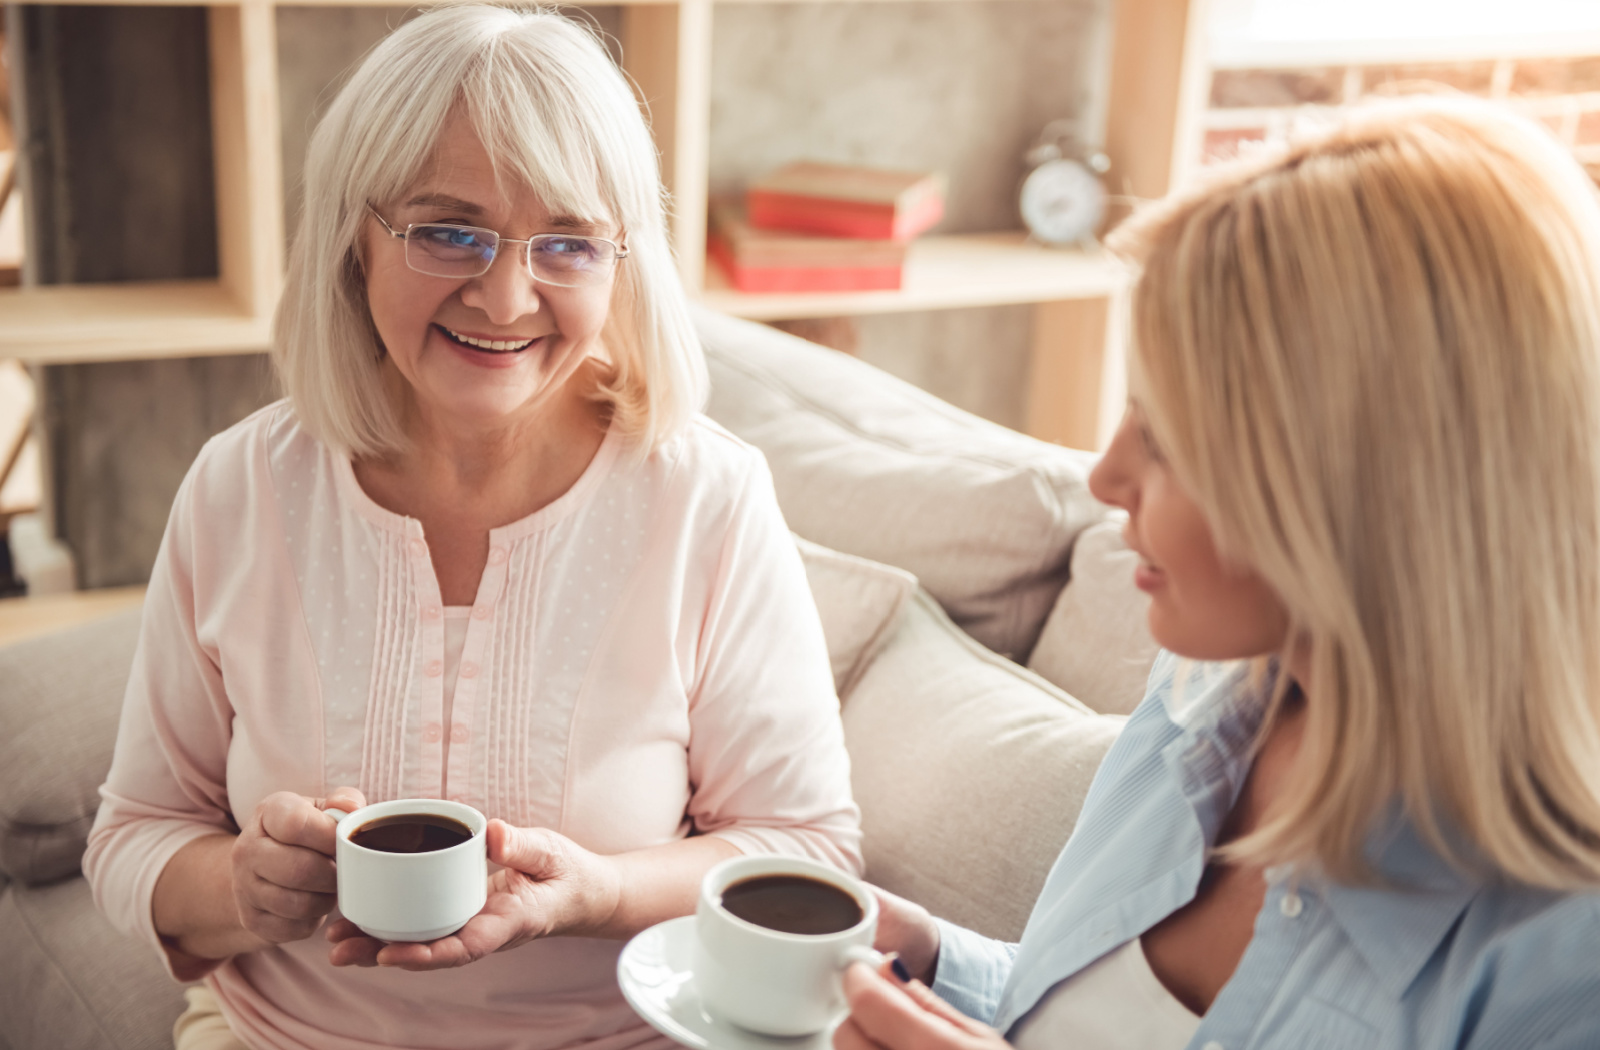 An older adult woman and her daughter sitting on a couch smiling and talking to each other while holding mugs of coffee